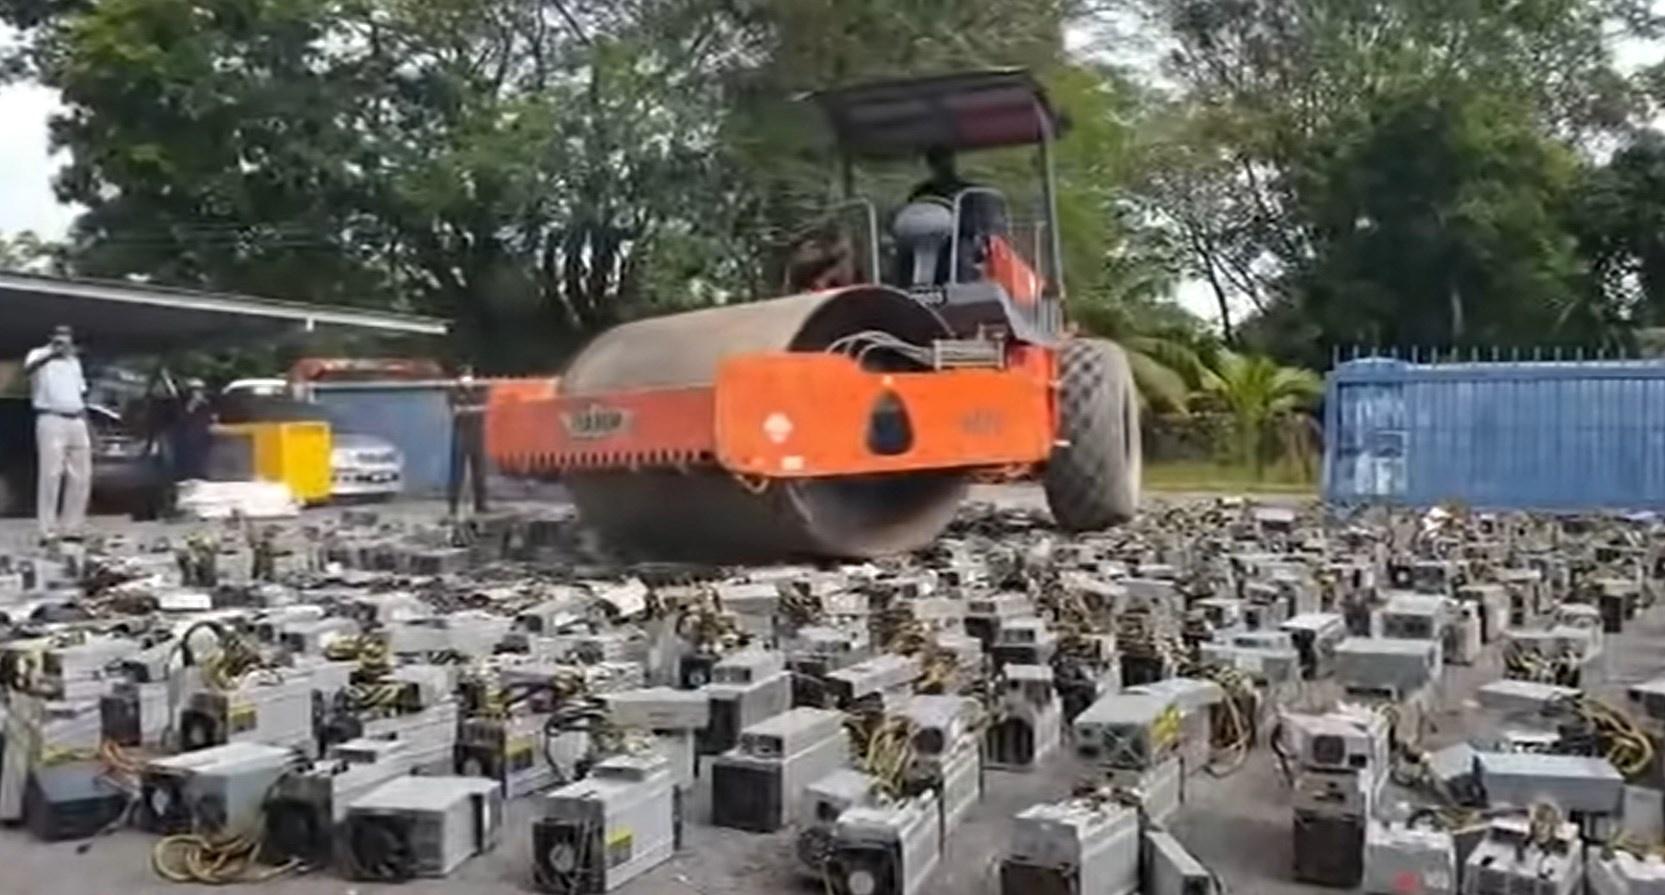 Police in Malaysia destroy equipment of illegal miners who caused forest fires